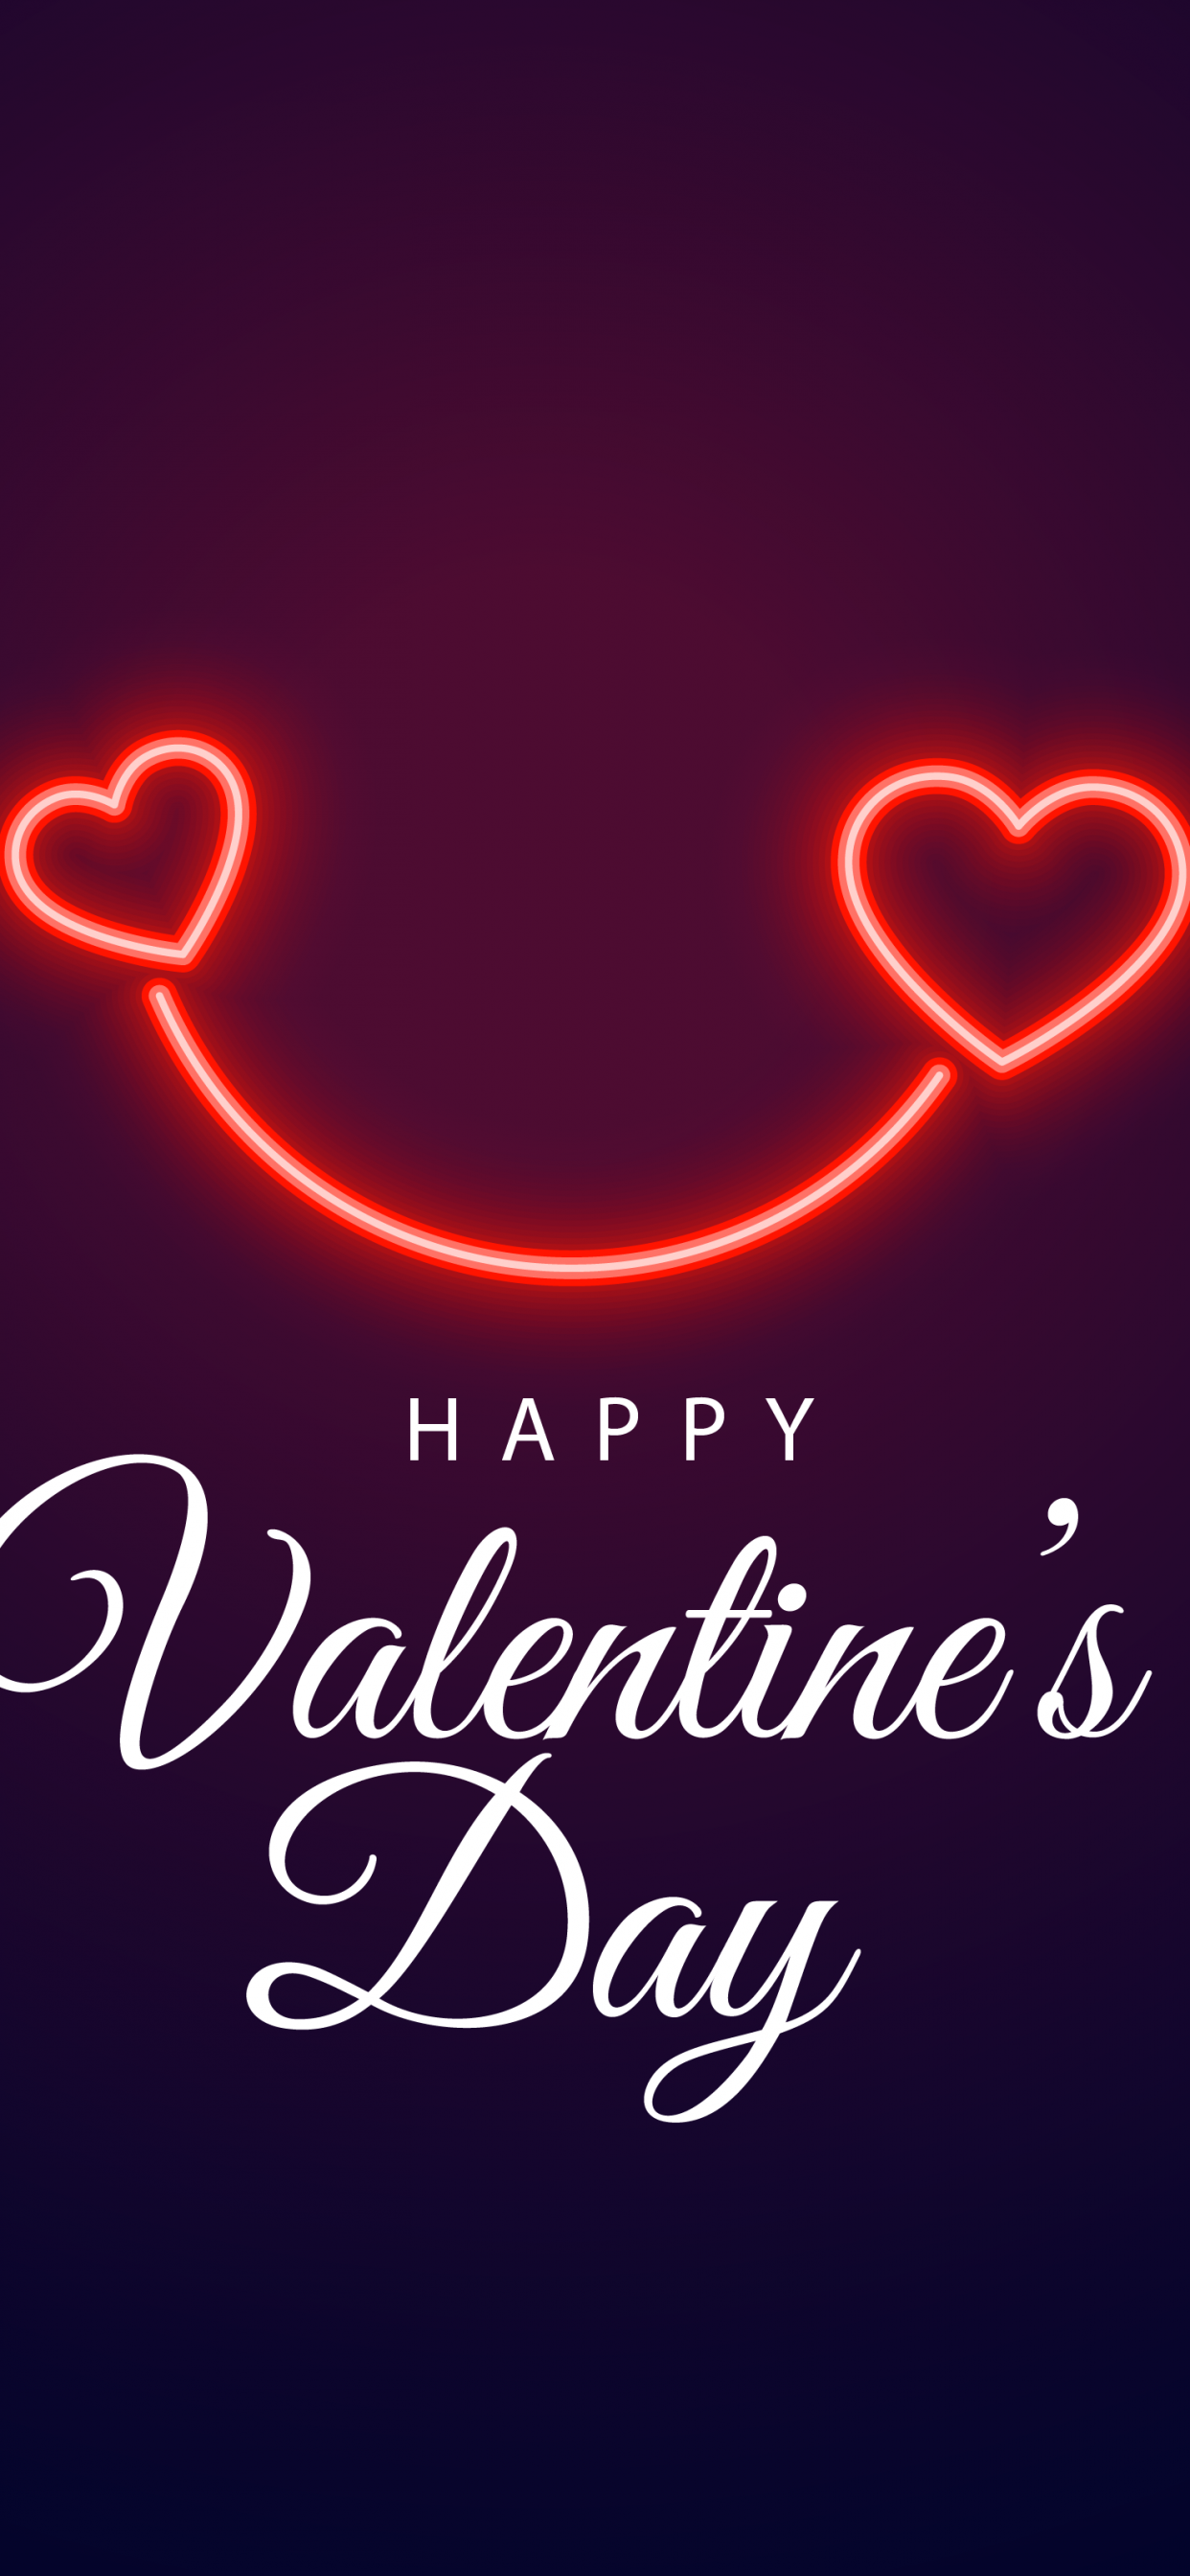 Valentines Day Special Free iPhone 6 Wallpapers  Juxxtapose